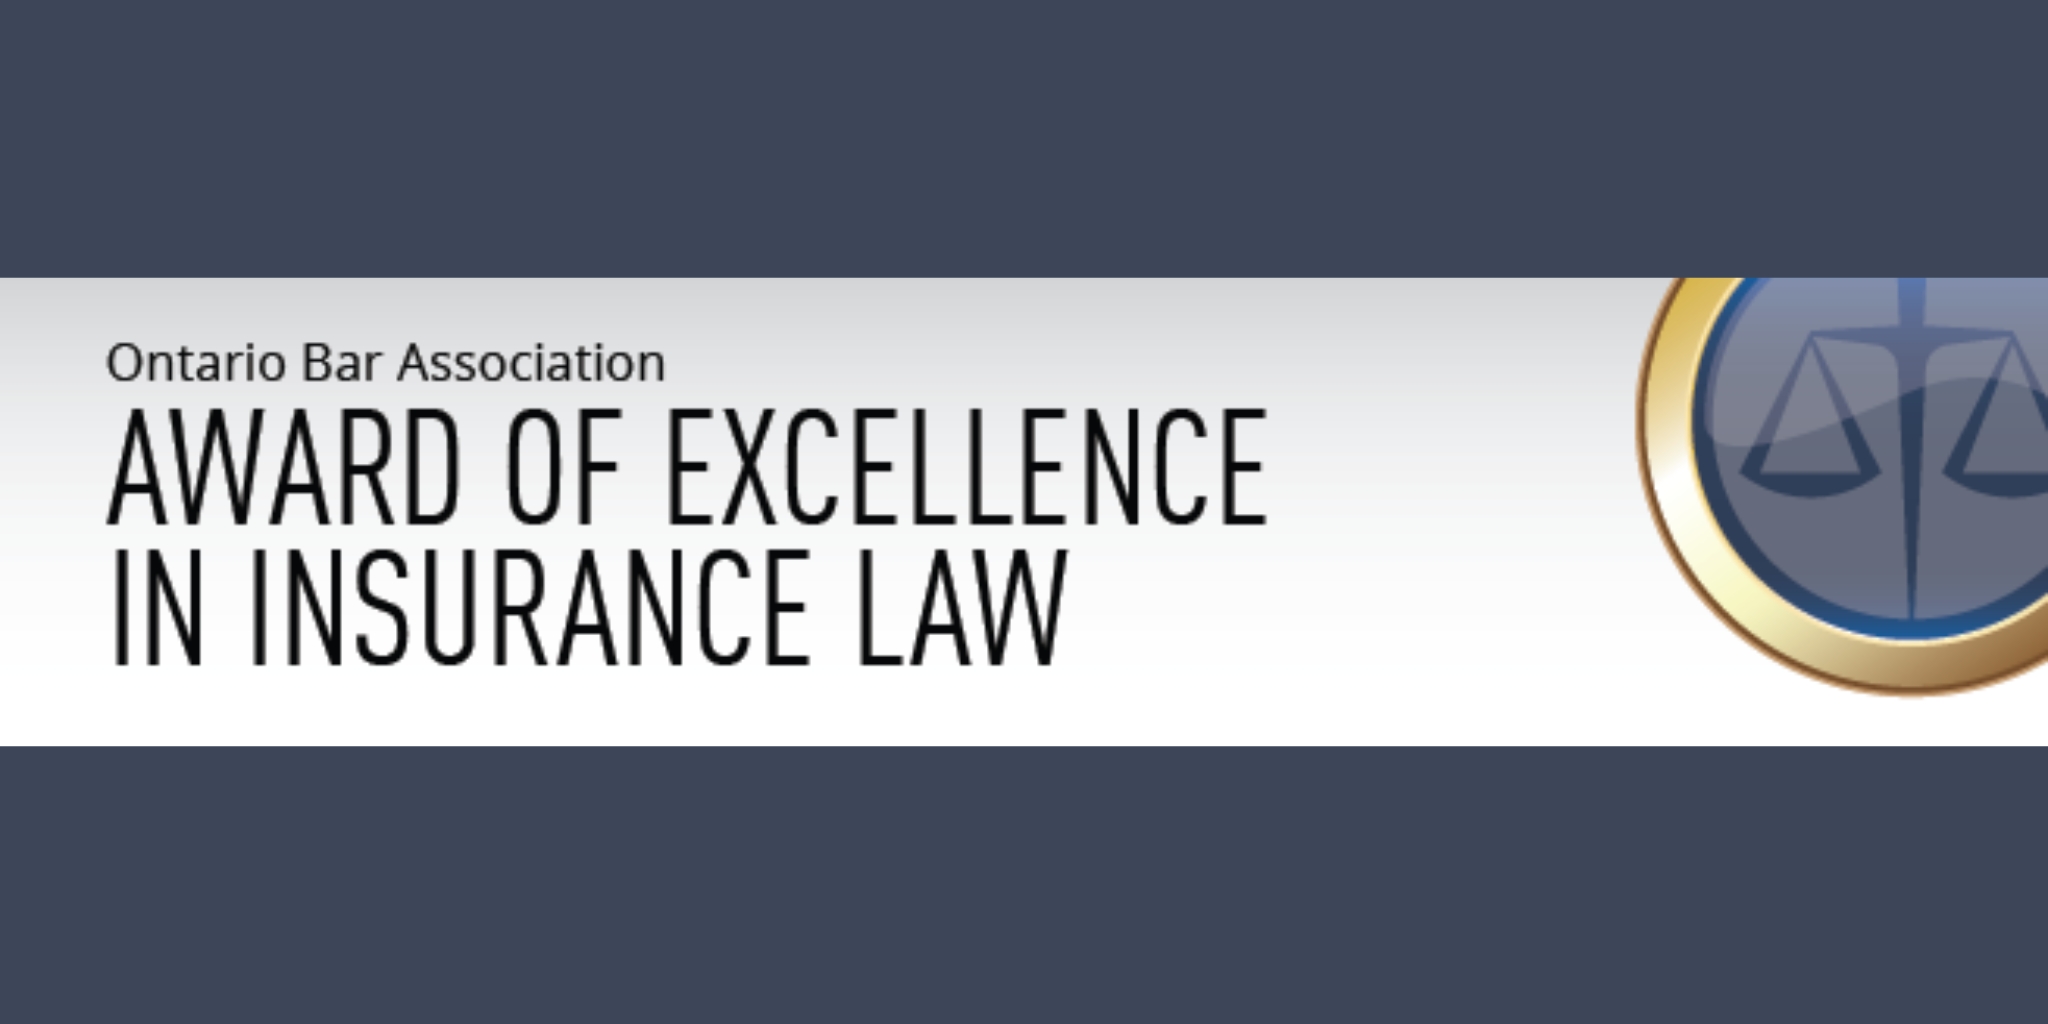 OBA Award of Excellence in Insurance Law